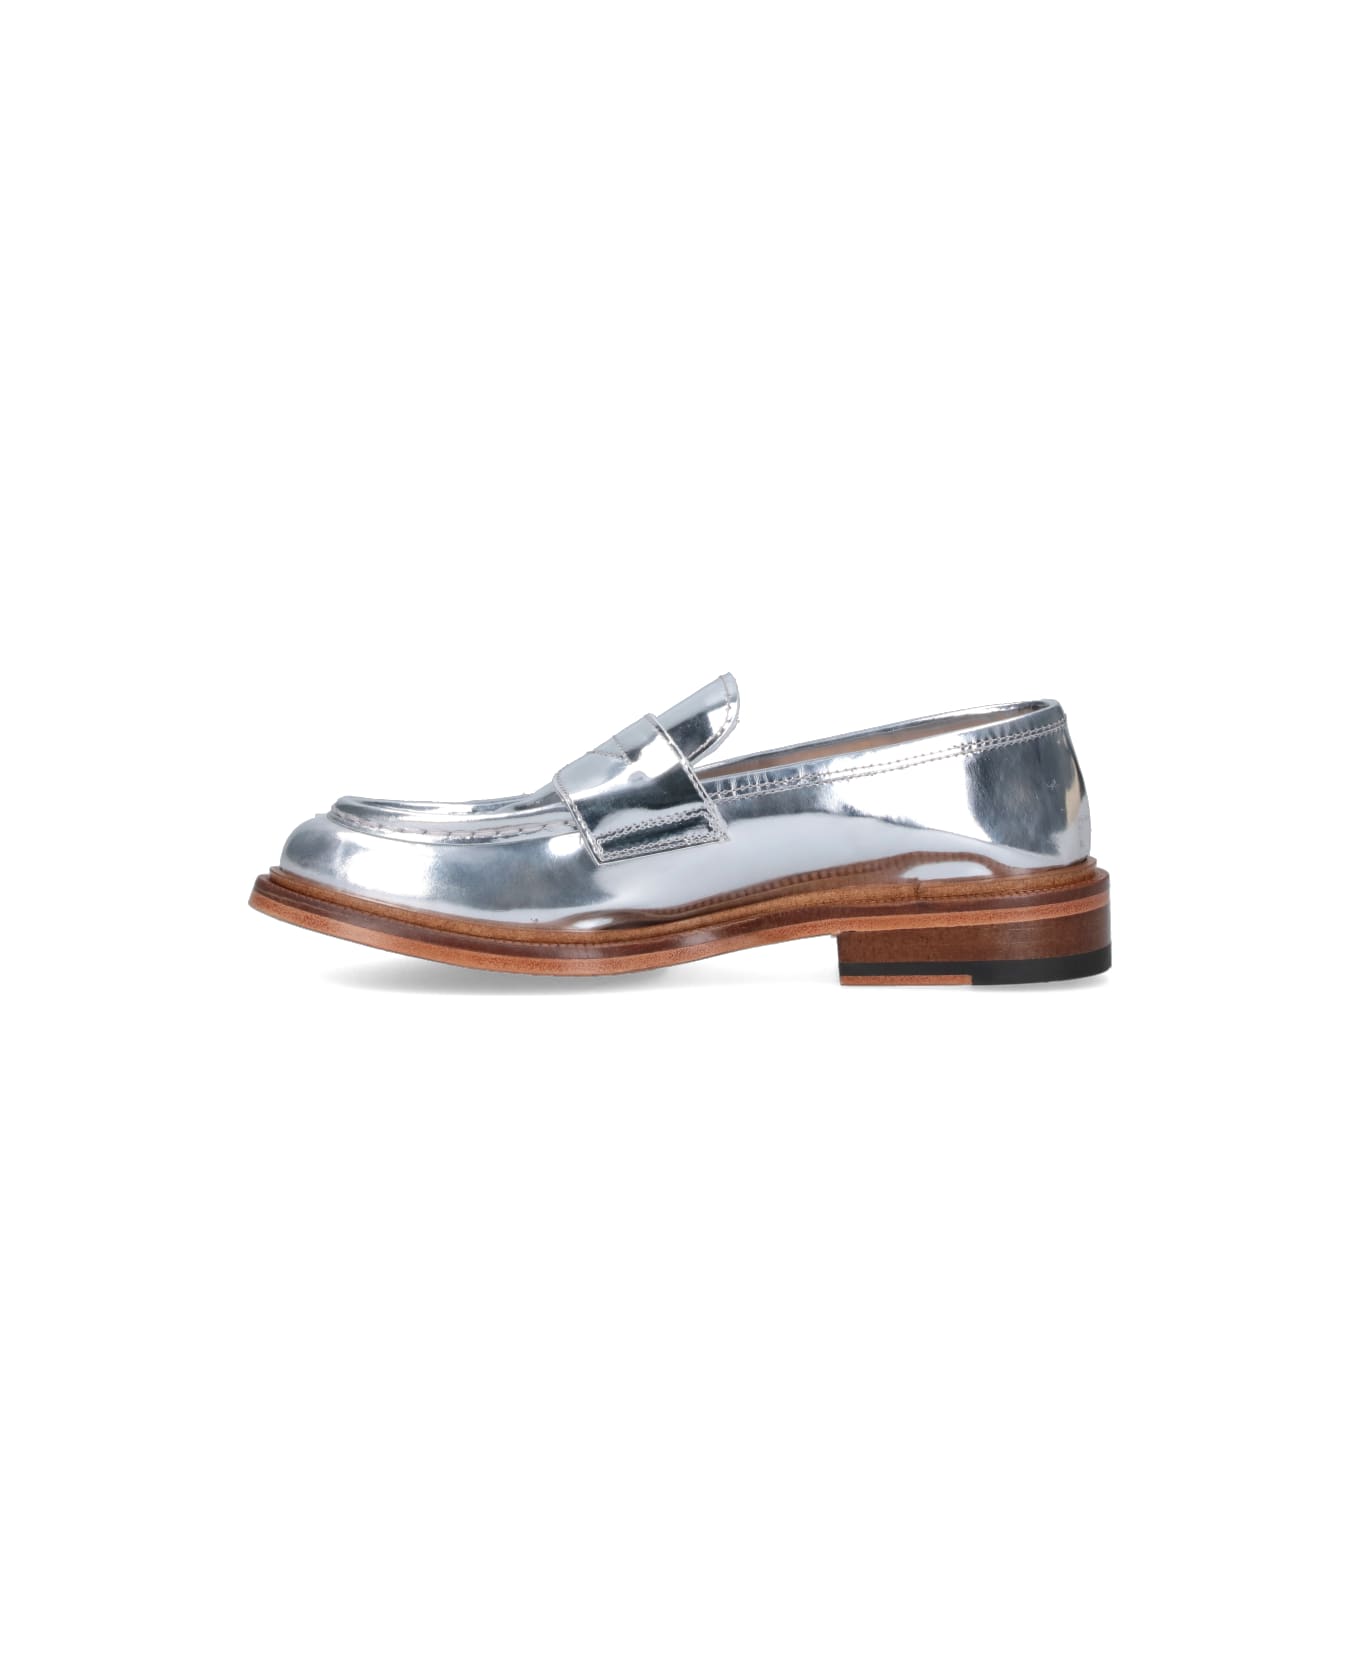 Alexander Hotto Classic Loafers - Silver フラットシューズ